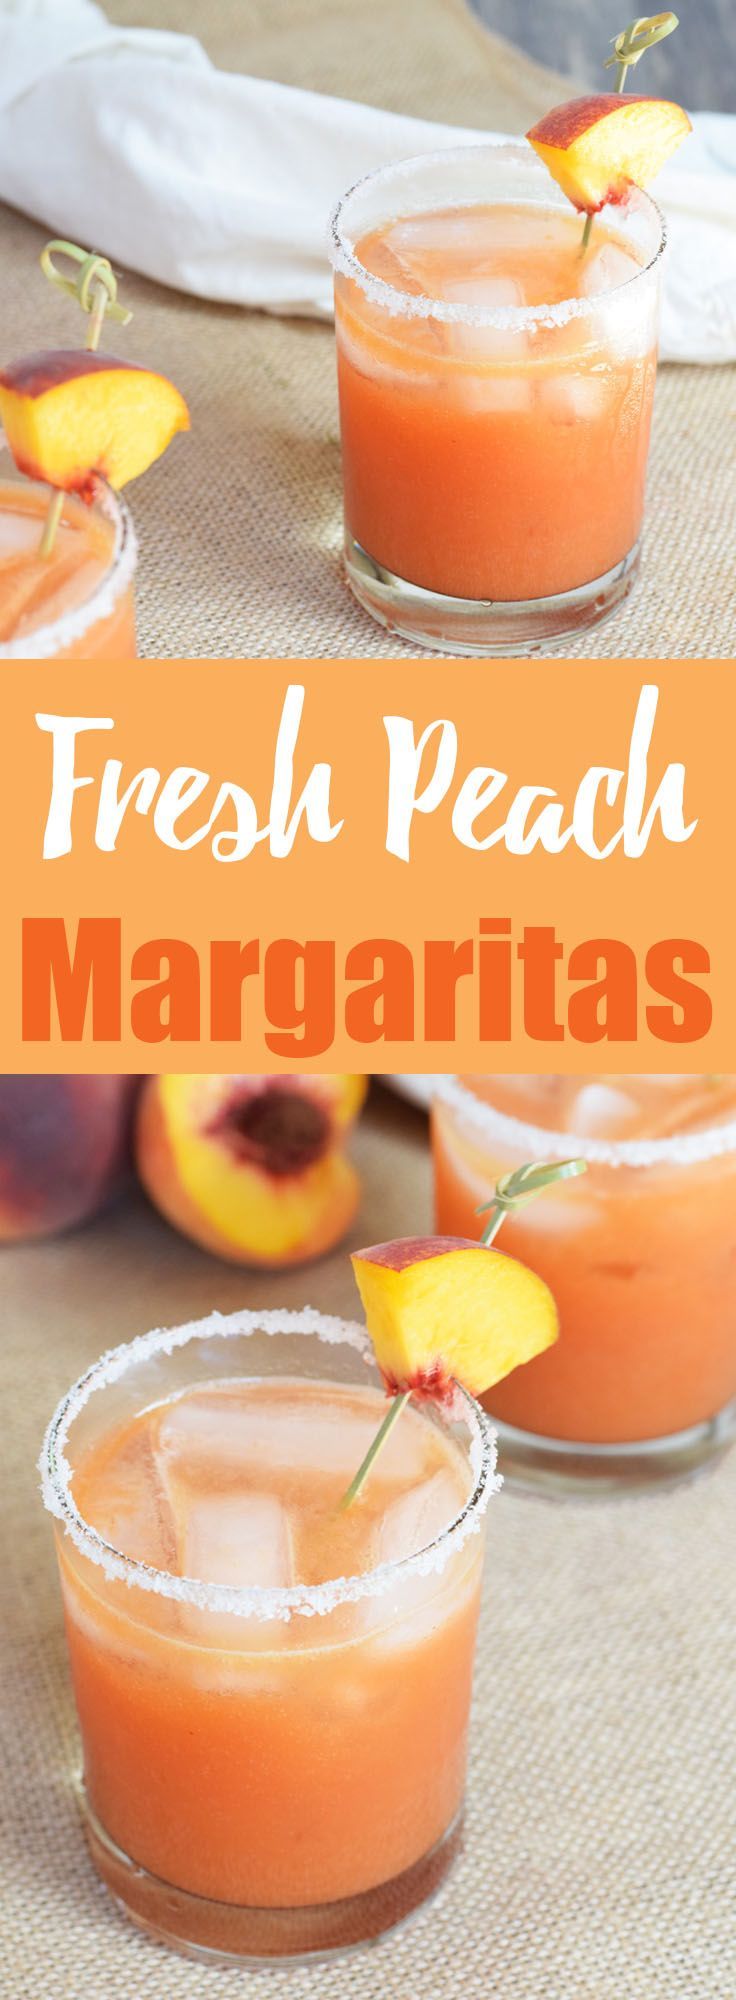 Fresh Peach Margaritas from Living Loving Paleo! | paleo and gluten-free, the perfect cocktail to celebrate the flavors of summer!